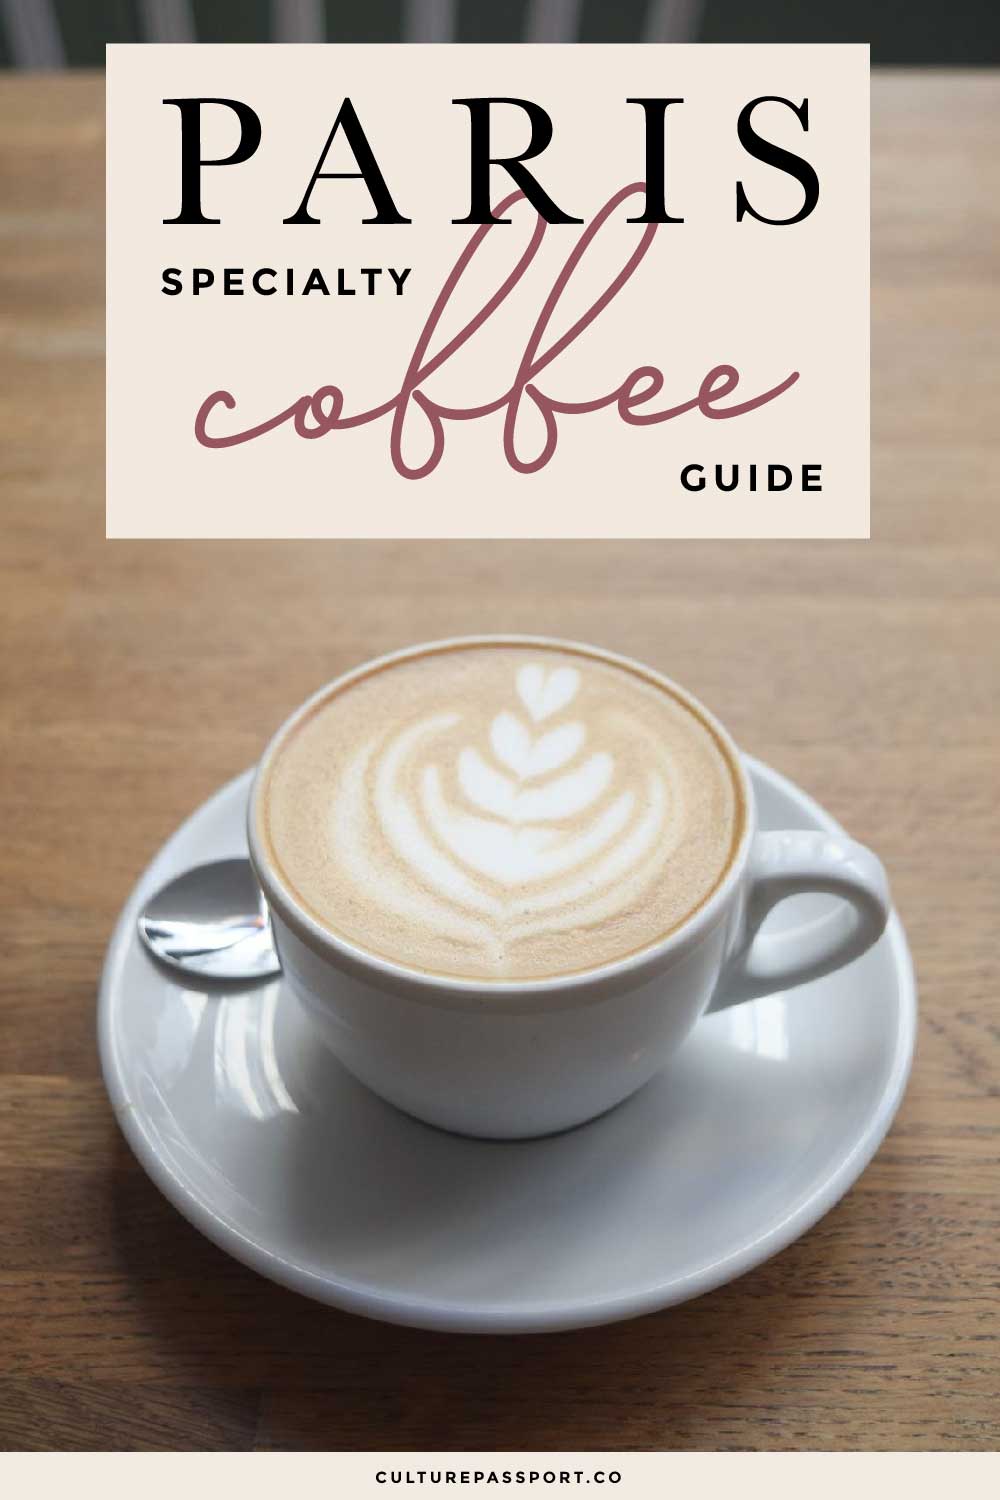 Paris Specialty Coffee Guide #coffeeaddict #coffeelovers #paristips